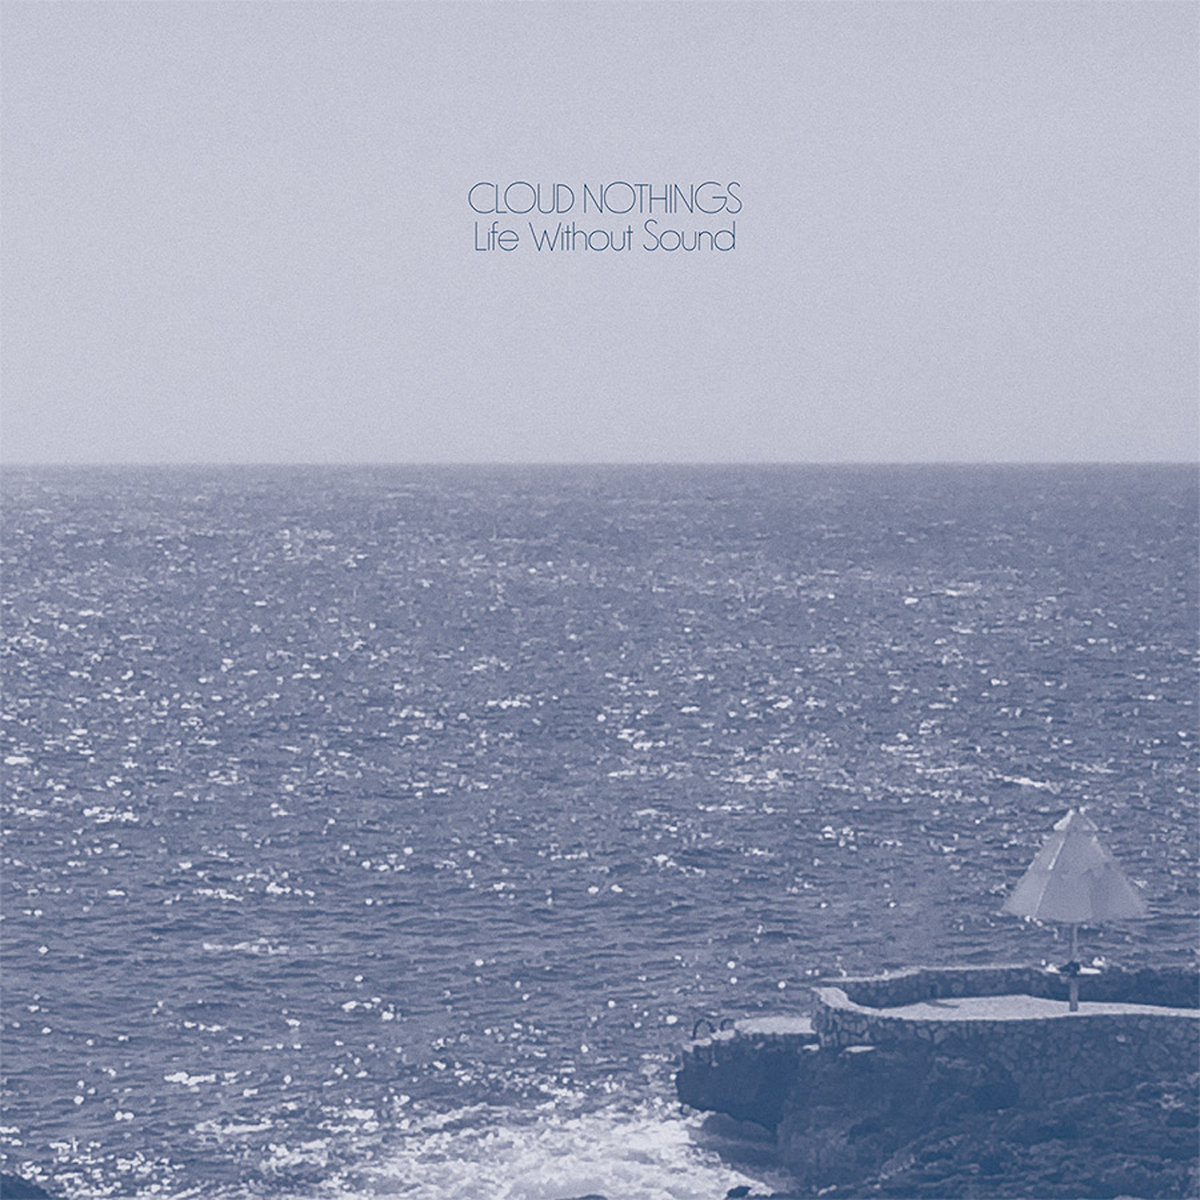 Cloud Nothings Life Without Sound